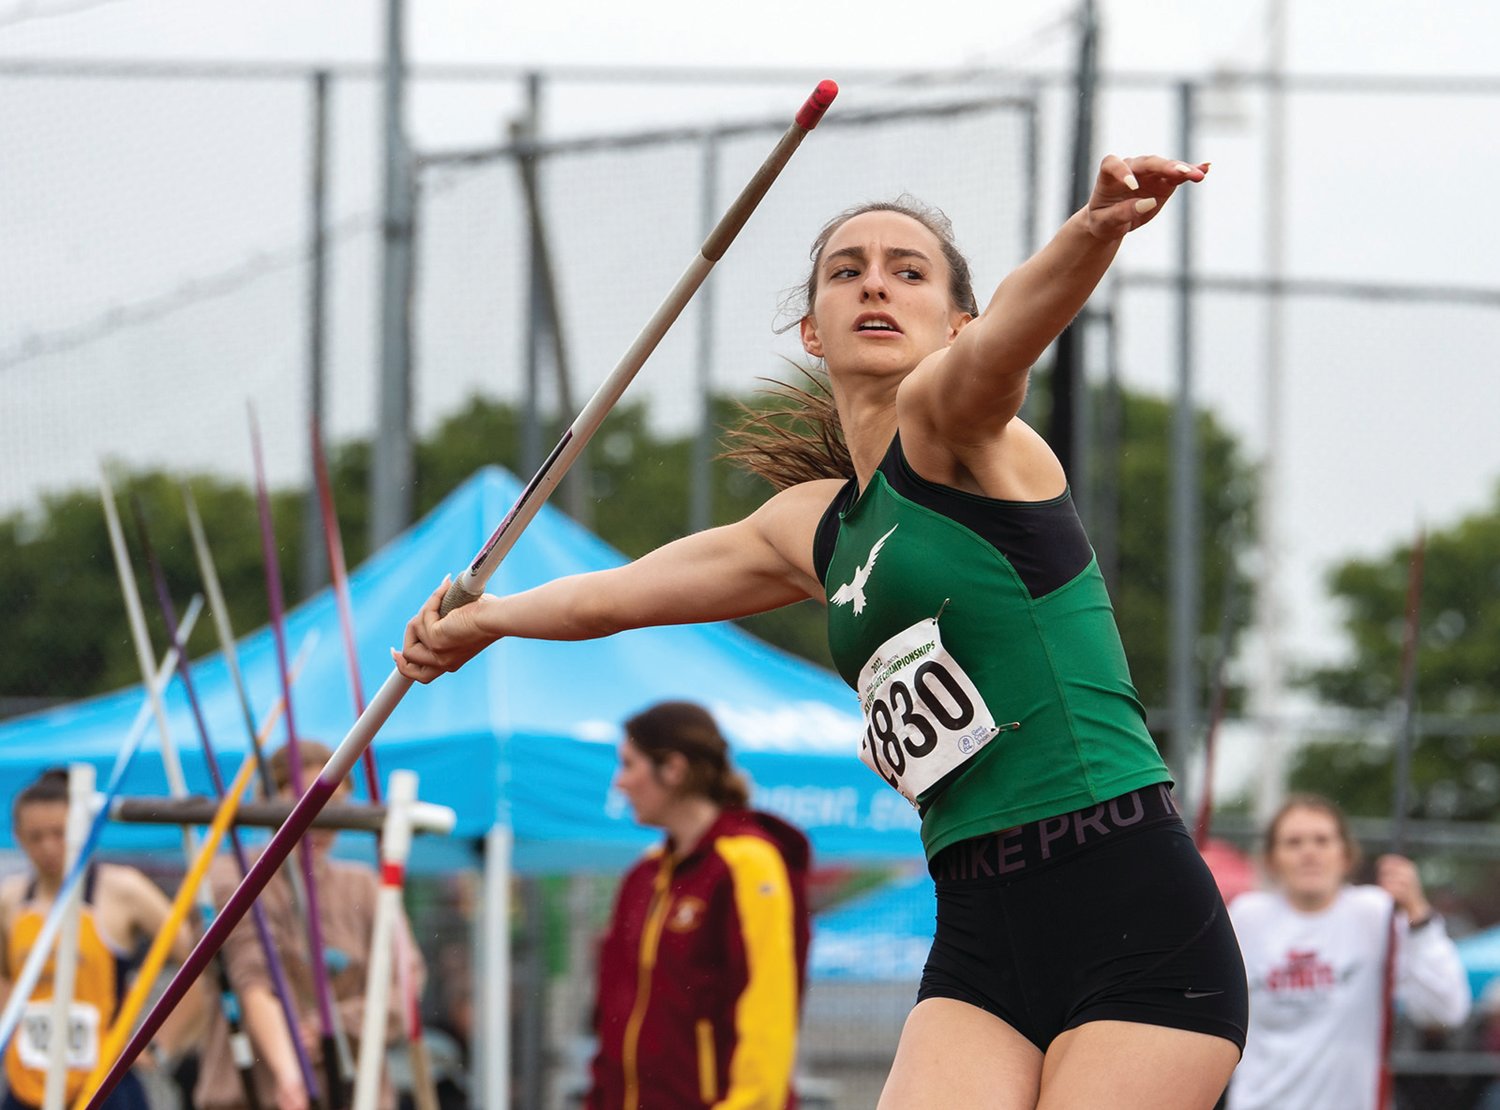 Tumwater's Natalie Sumrok makes an attempt in the 2A Girls Javelin at the 2A/3A/4A State Track and Field Championships on Thursday, May 26, 2022, at Mount Tahoma High School in Tacoma. (Joshua Hart/For The Chronicle)